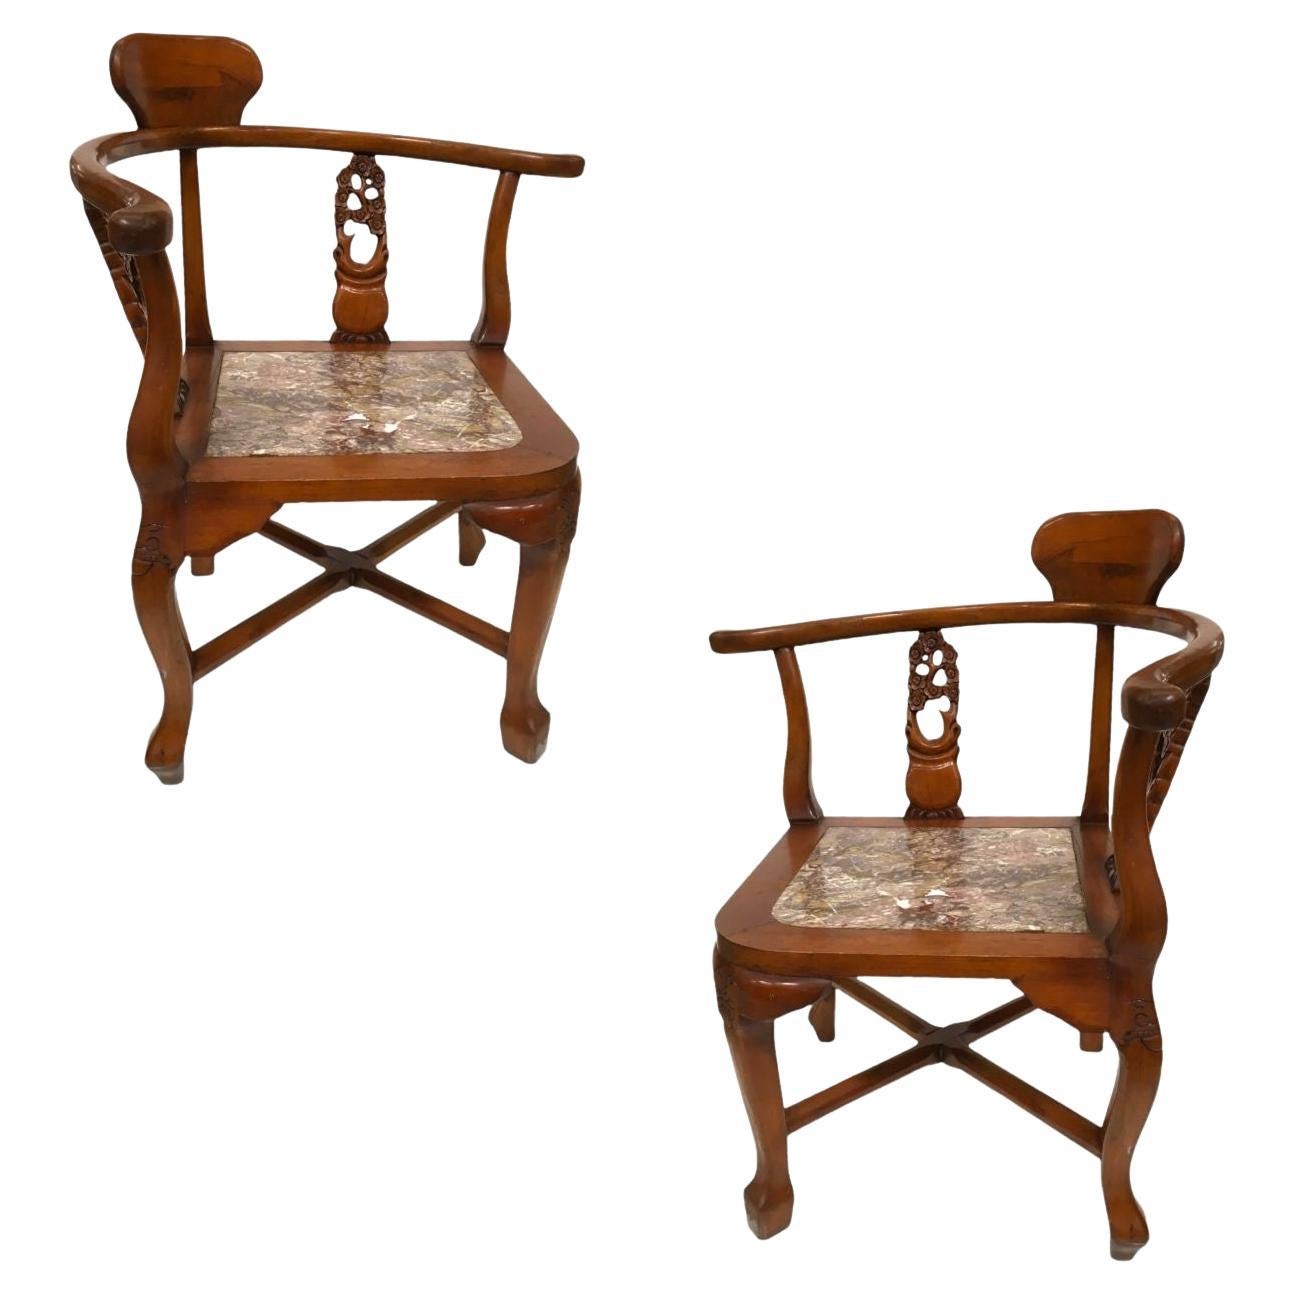 Rosewood Horseshoe Chair with Marble Seat by James Mont, Pair